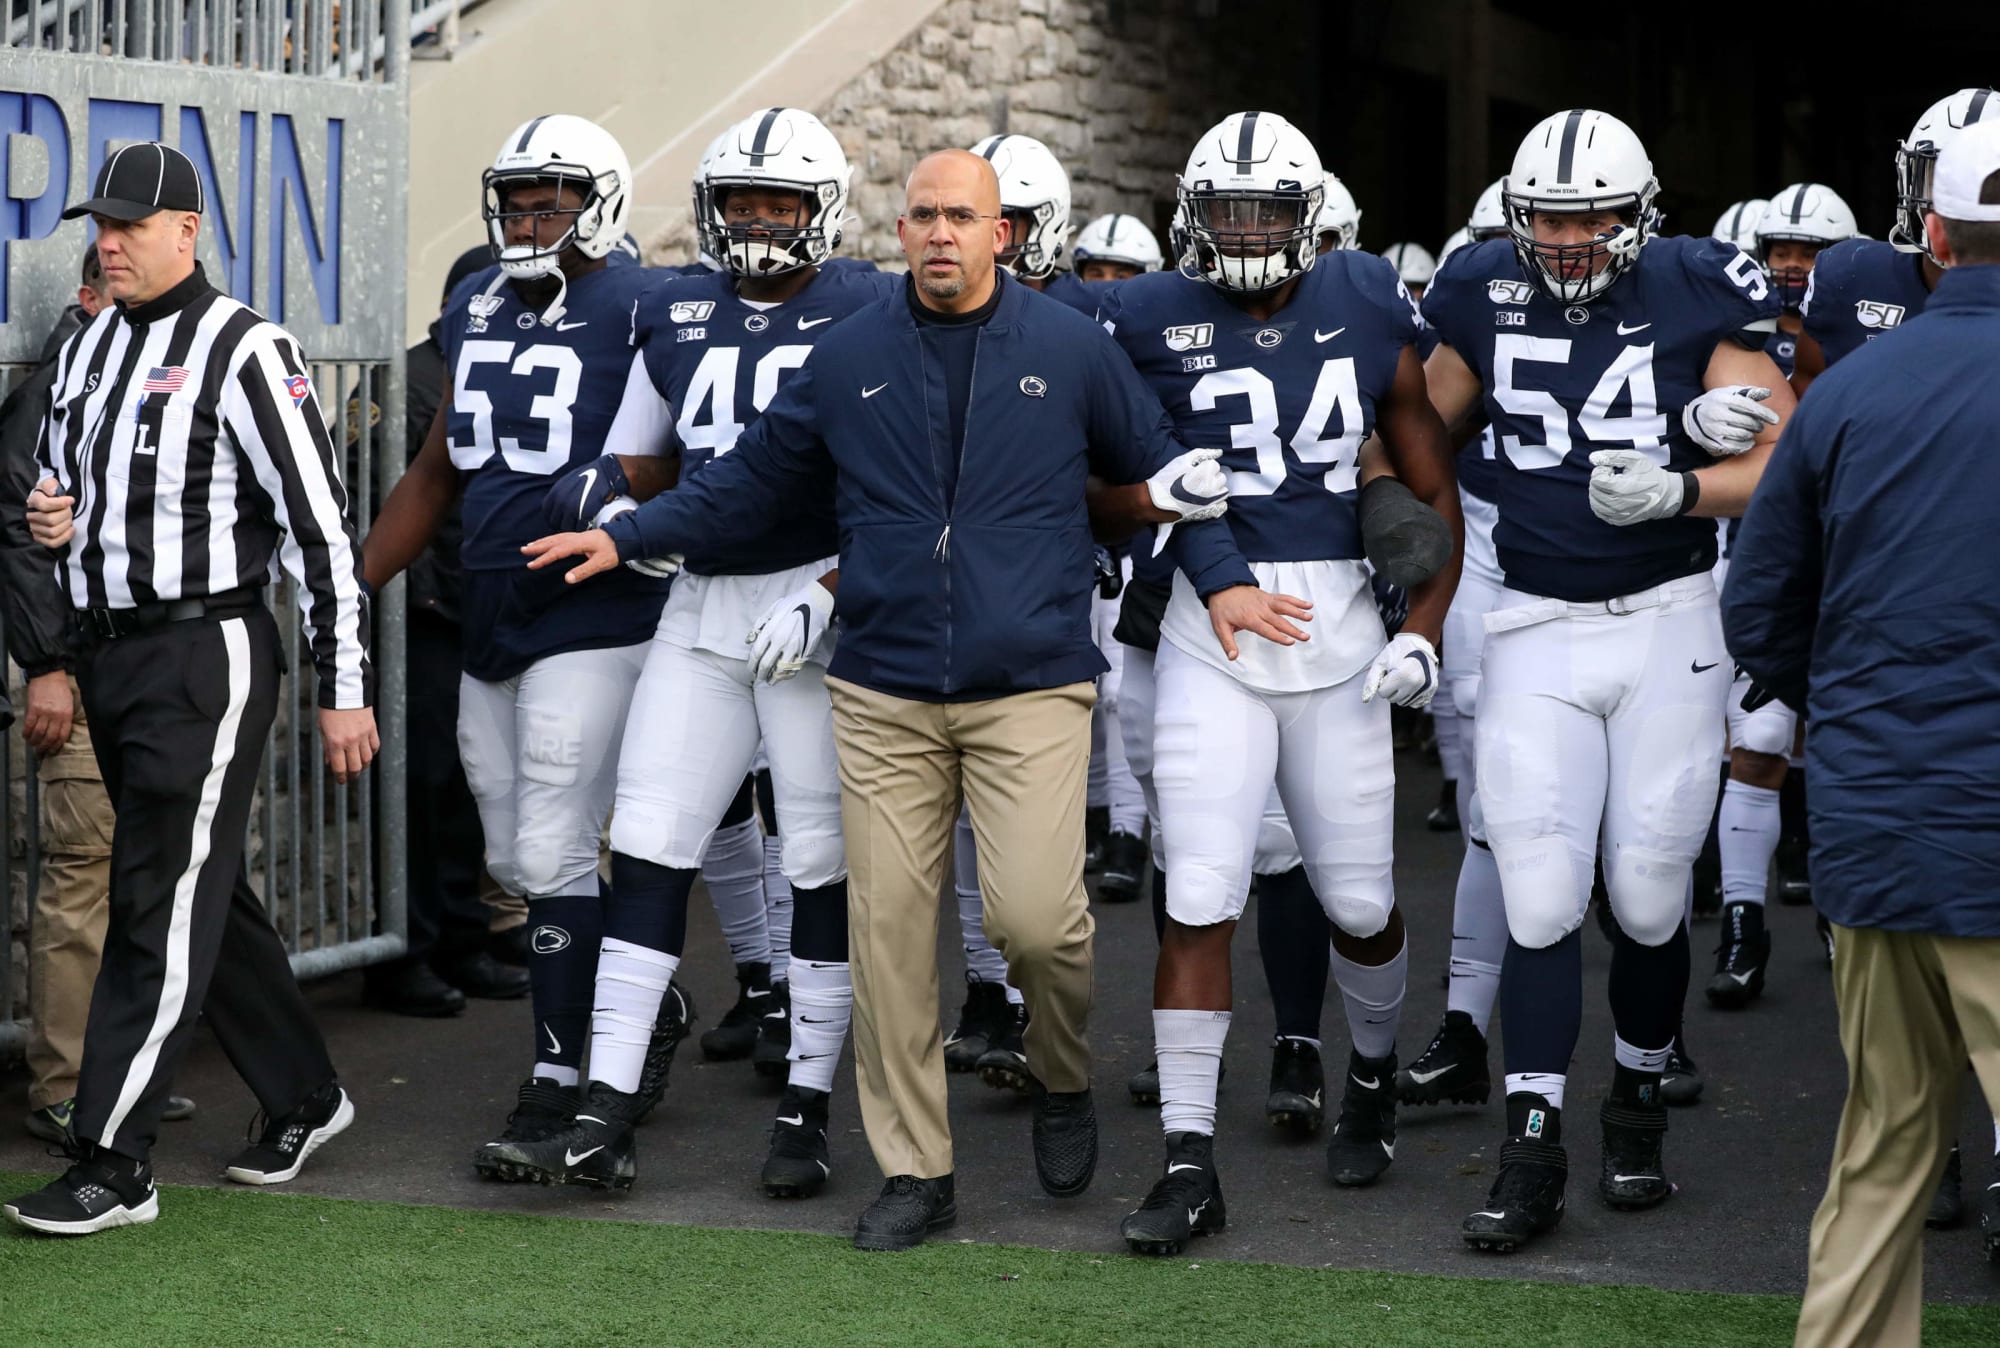 Penn State Football Top 3 recruiting targets left in 2021 for Nittany